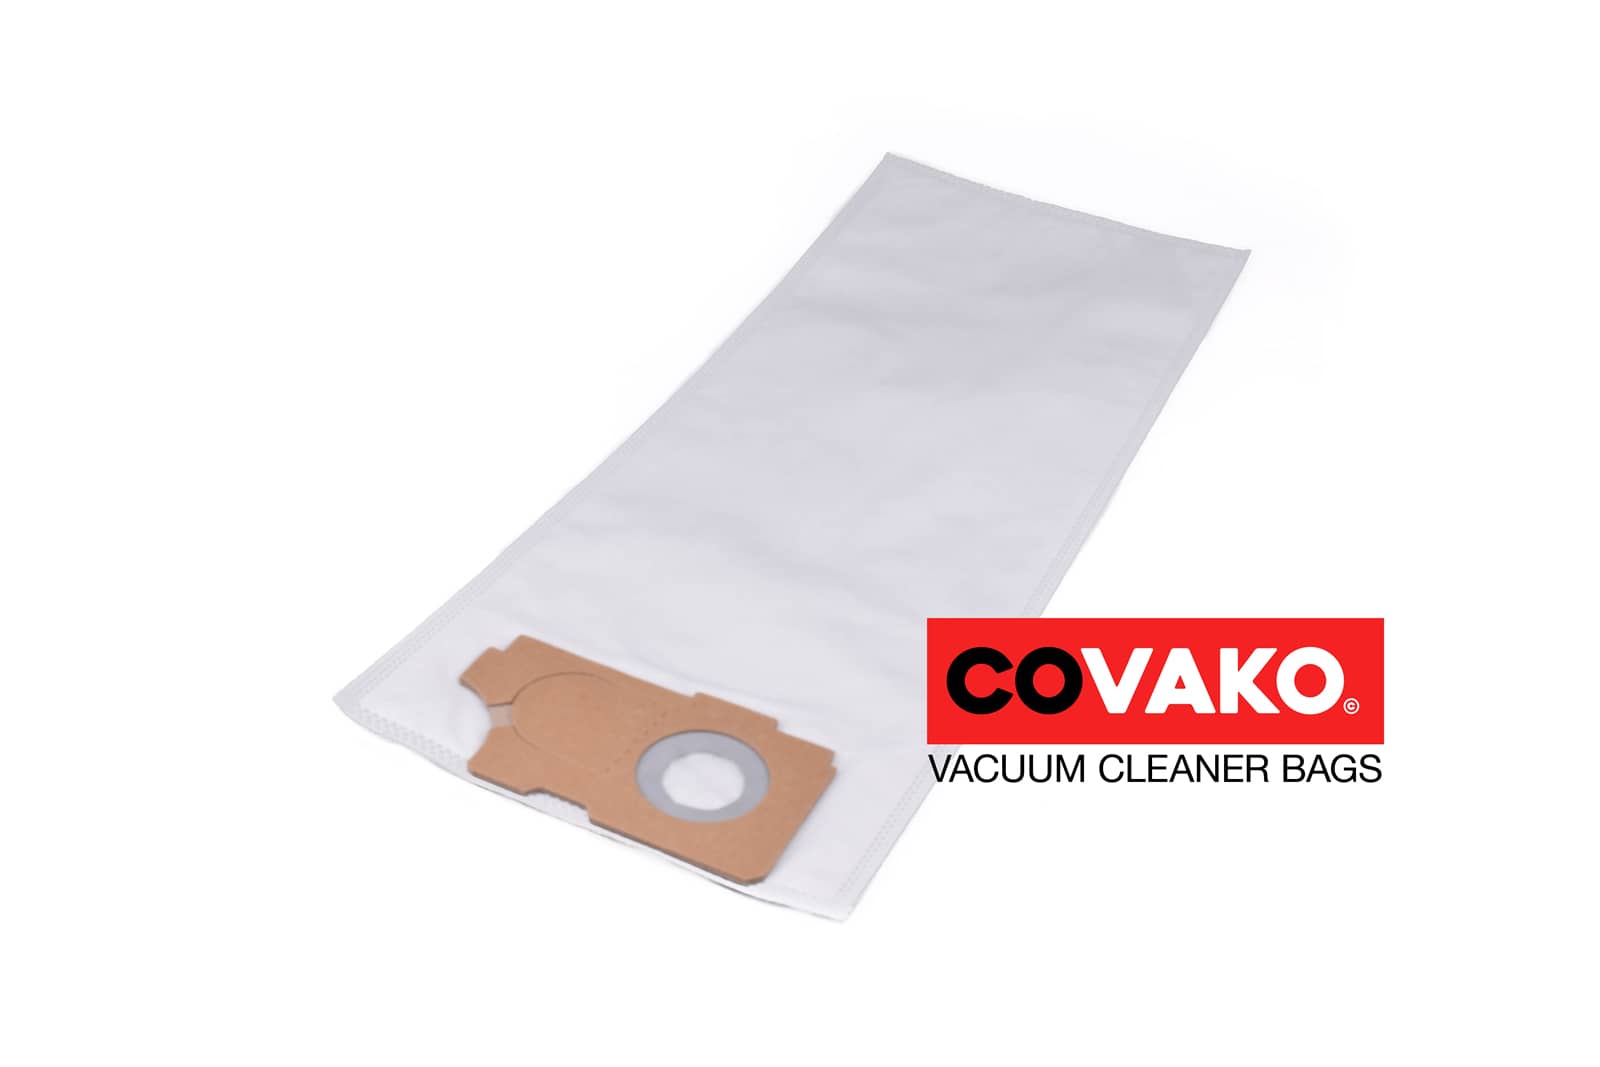 Fast Comfort 36 / Synthesis - Fast vacuum cleaner bags